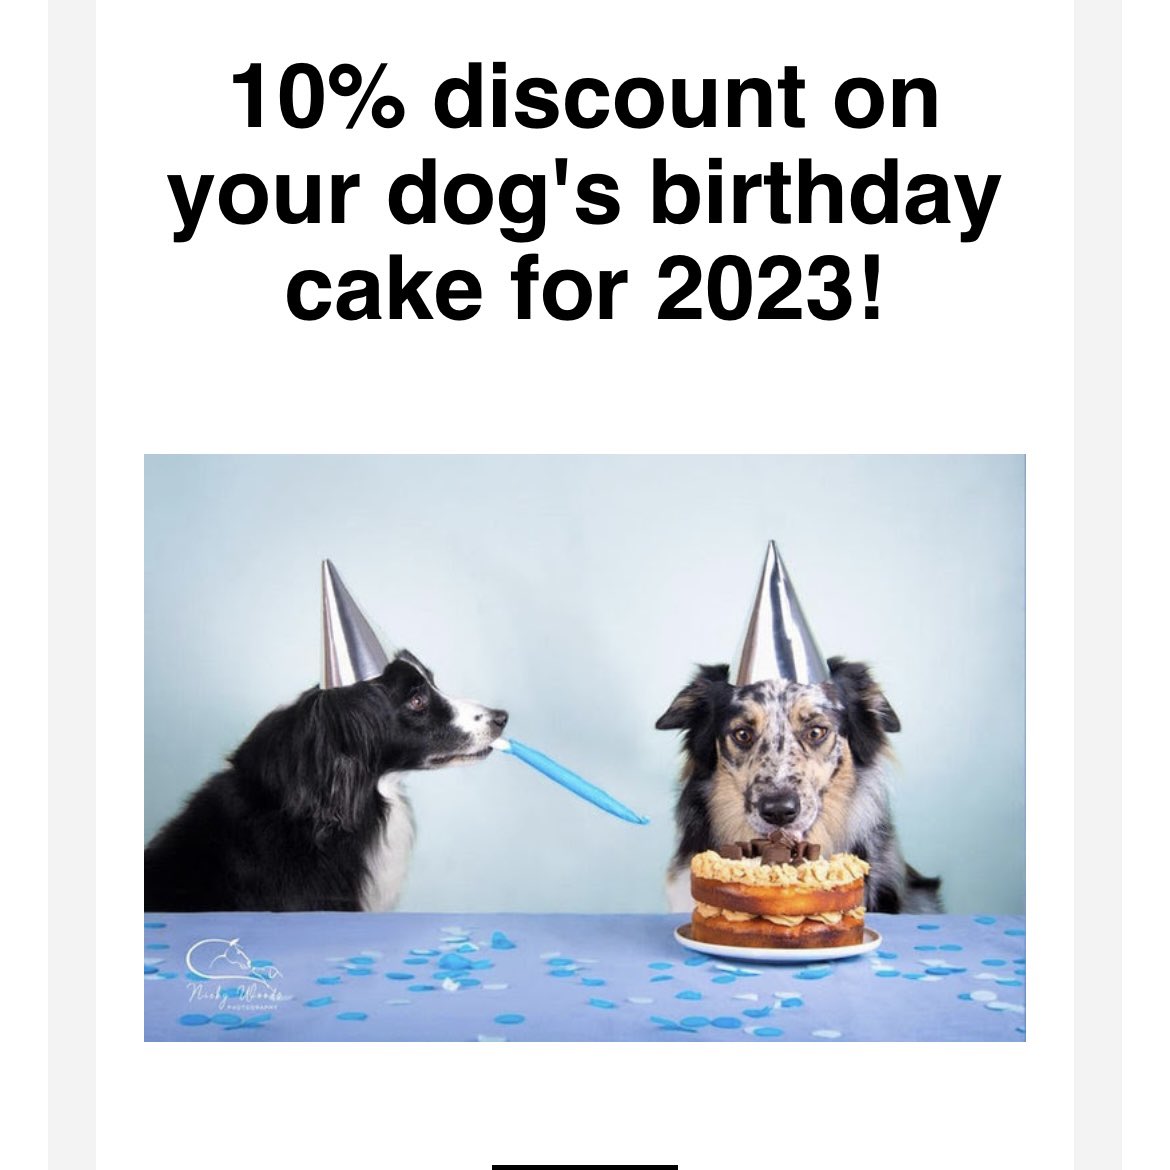 If you’ve shopped with us before, please look out for our email with a 10% discount code for you! #pupcakes #dogcake #dogbirthday #dogbakery #doglovers ❤️🐾